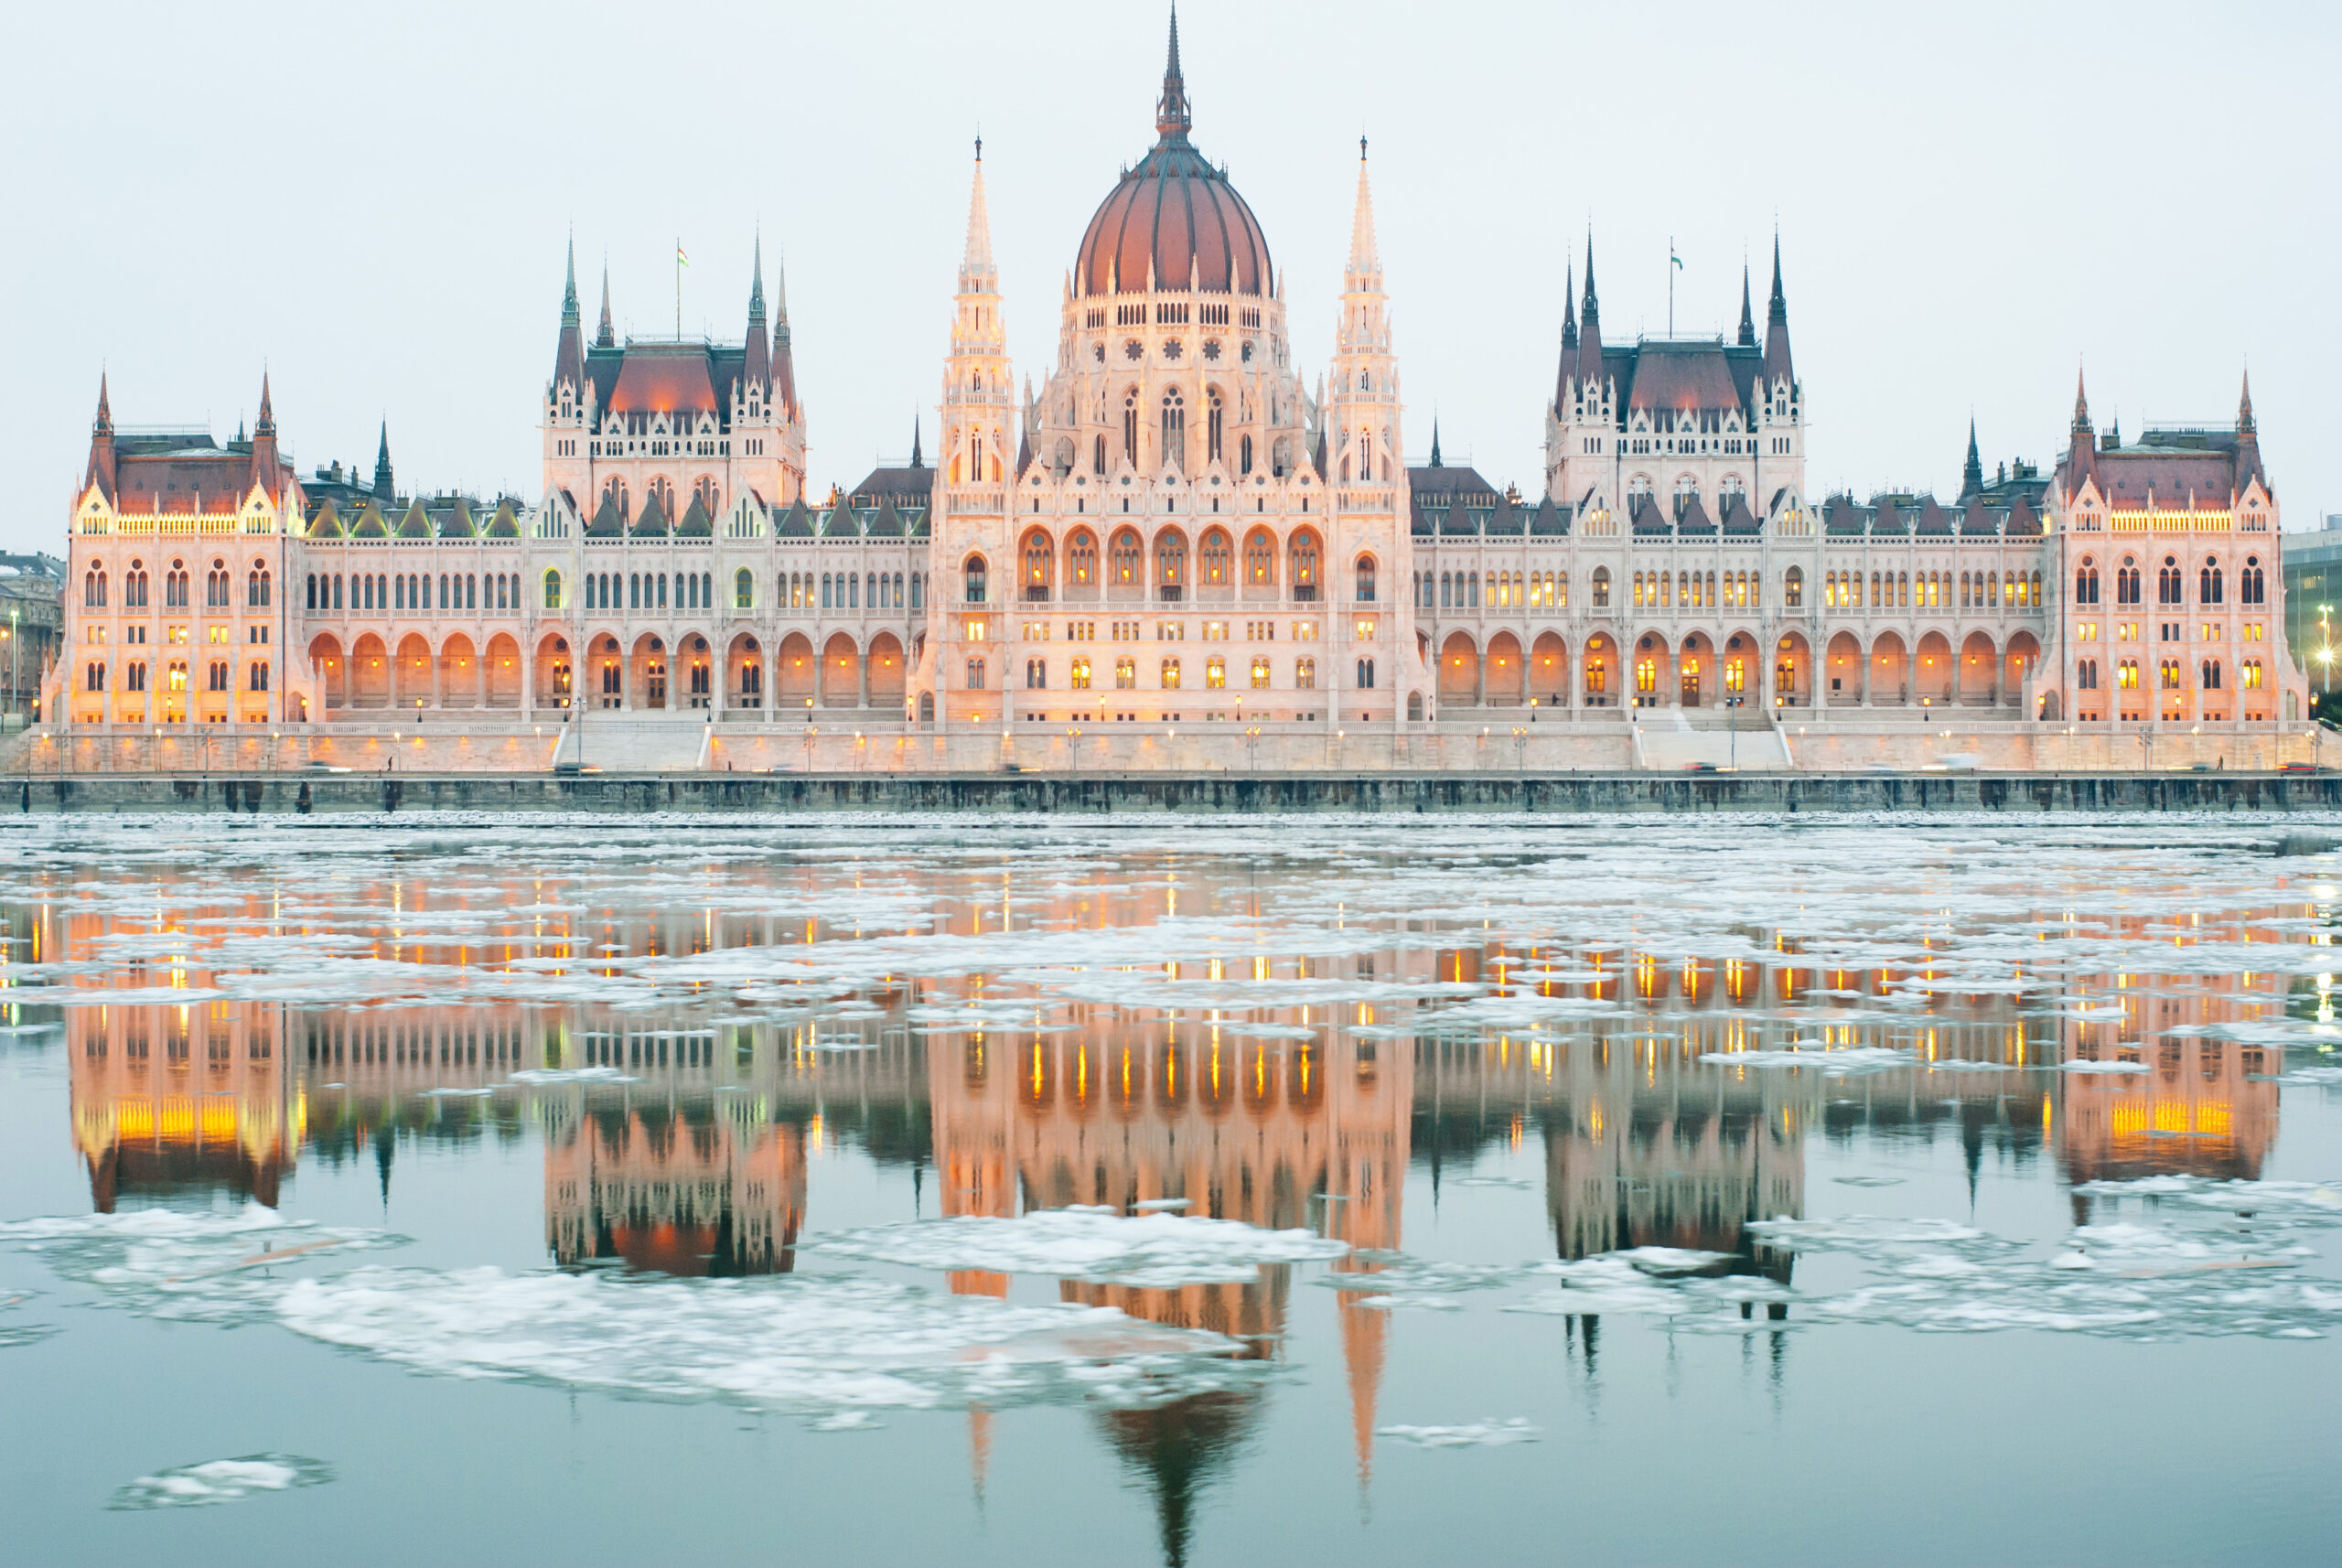 Budapest parliament lit of up at night with ice on the river below and grey sky